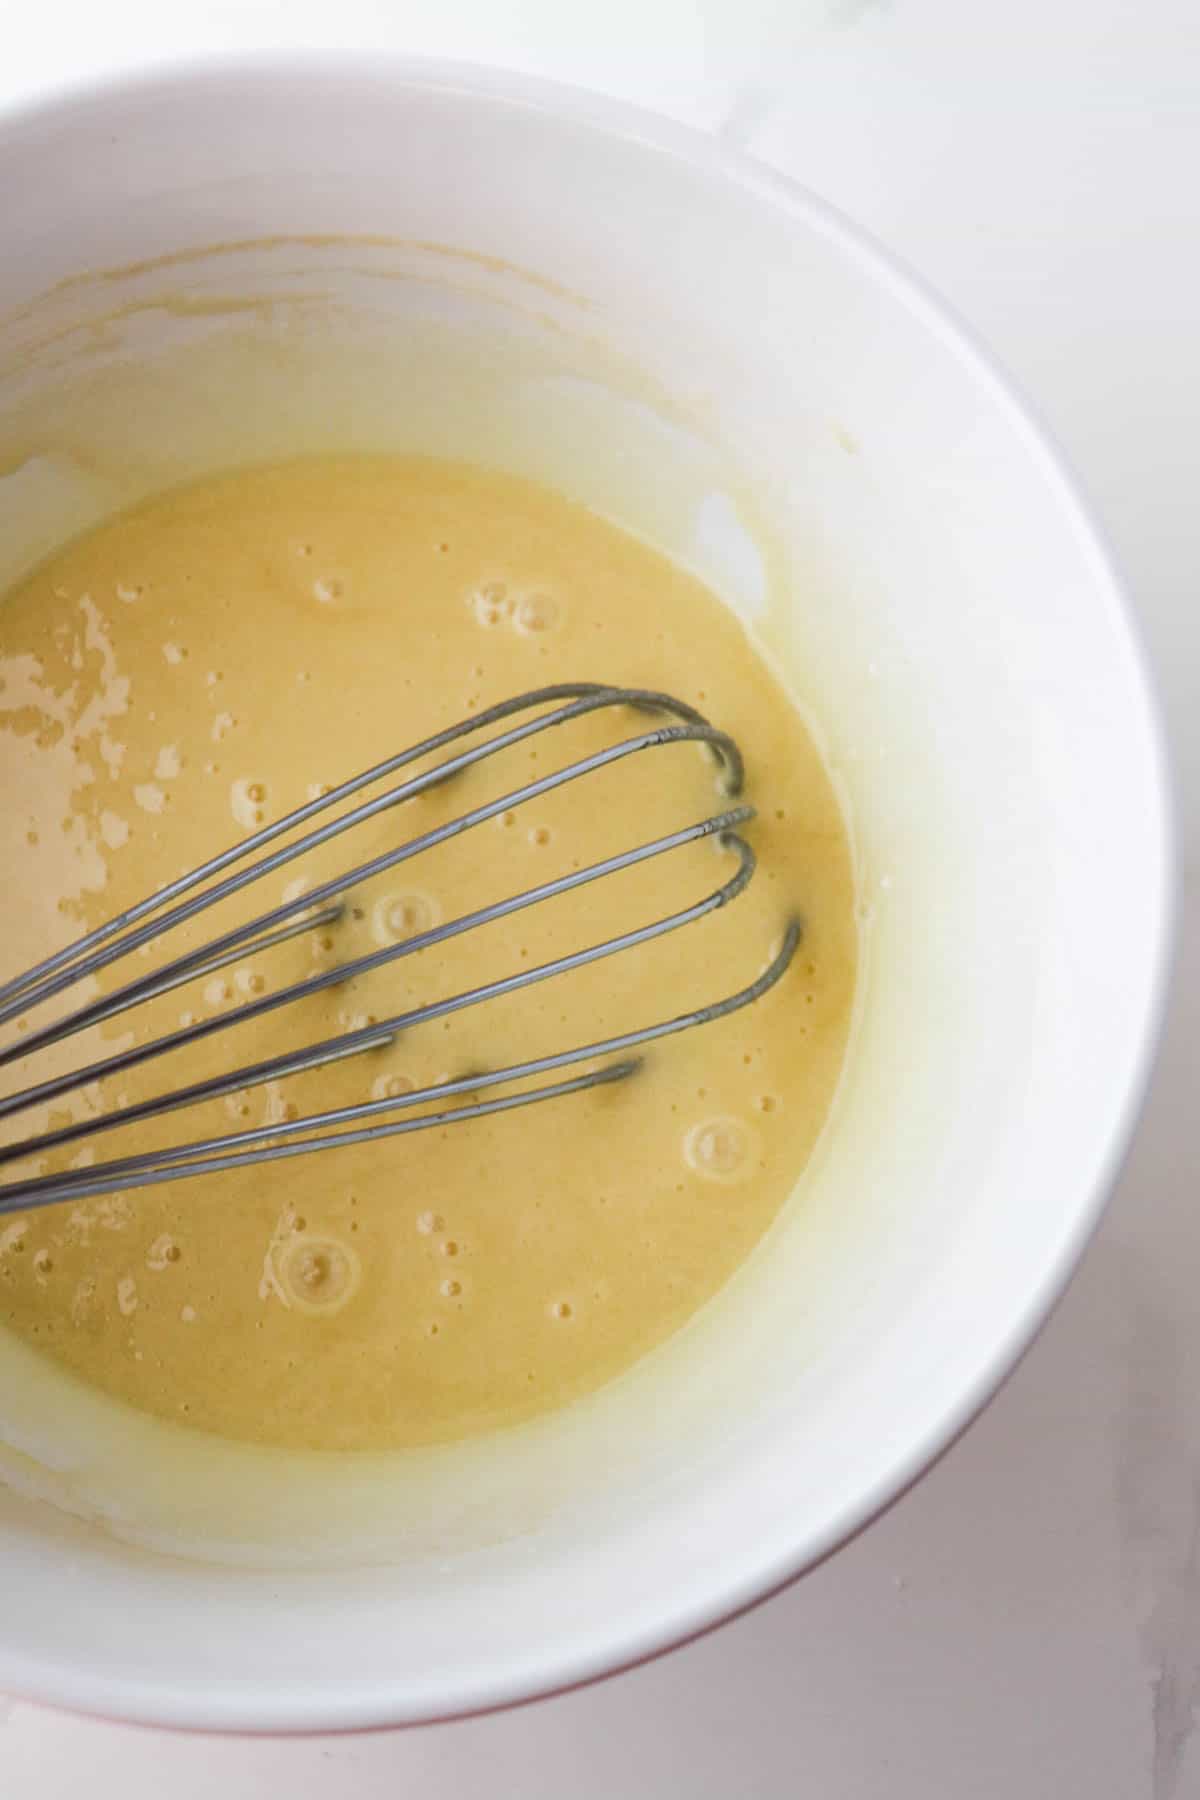 Eggs, sugar, oil and vanilla extract whisked together in a white bowl.